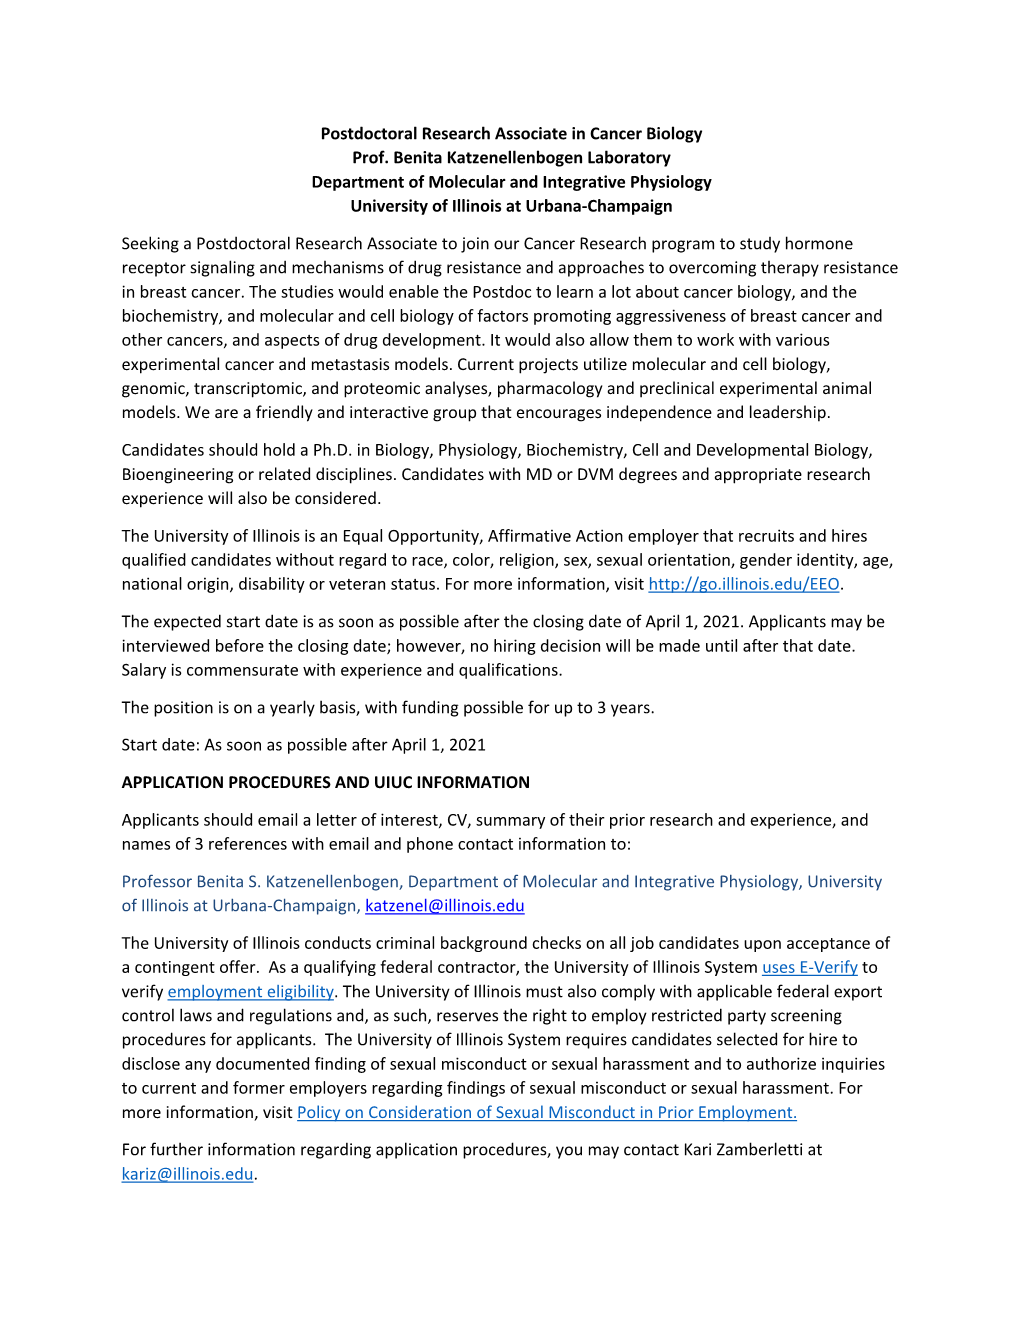 Postdoctoral Research Scientist Position in Cancer Biology